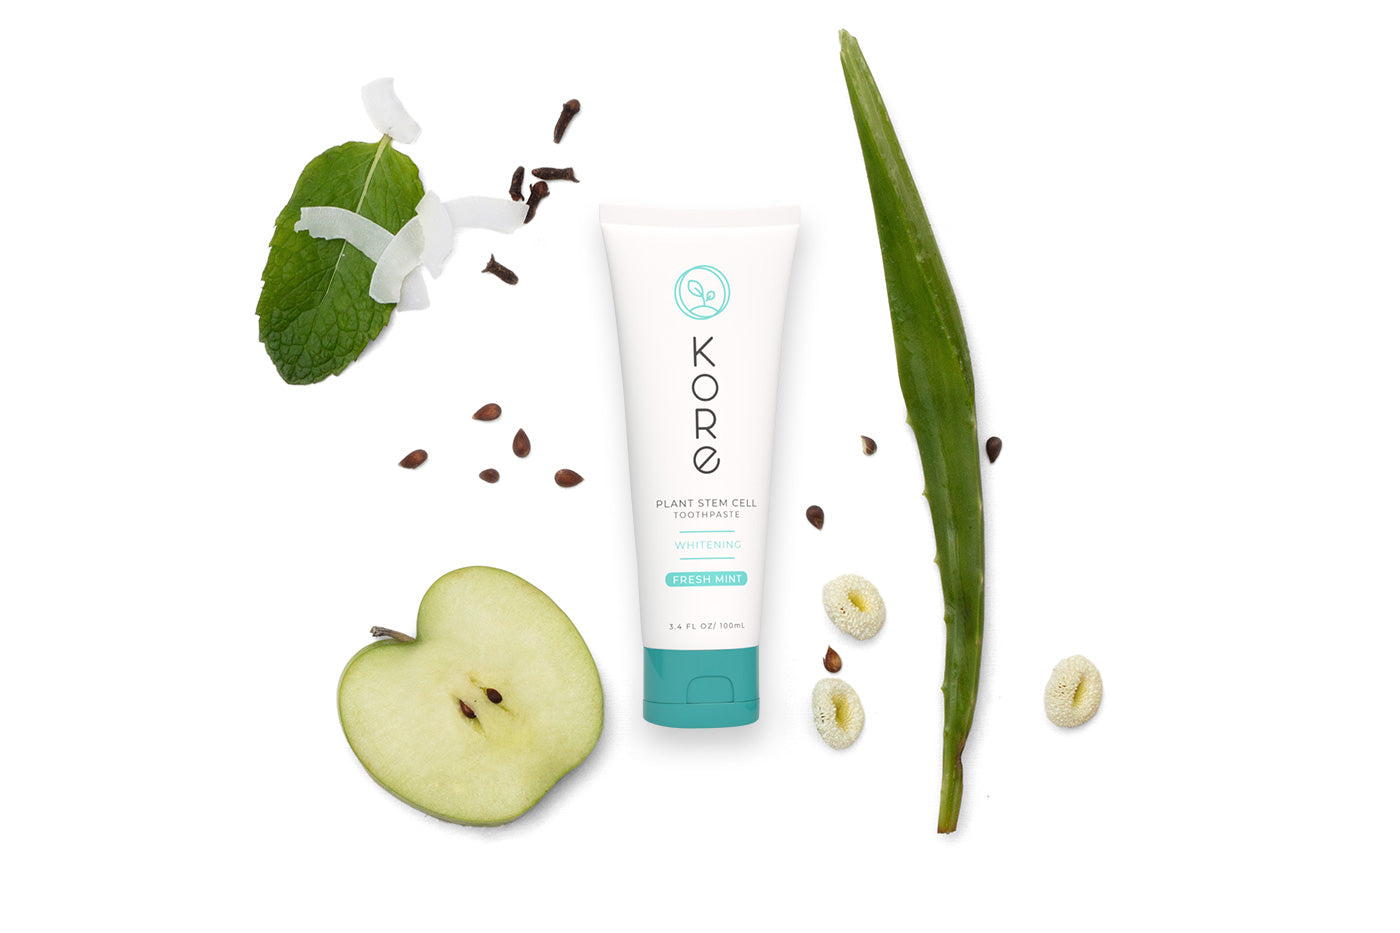 Mint Plant Stem Cell Toothpaste